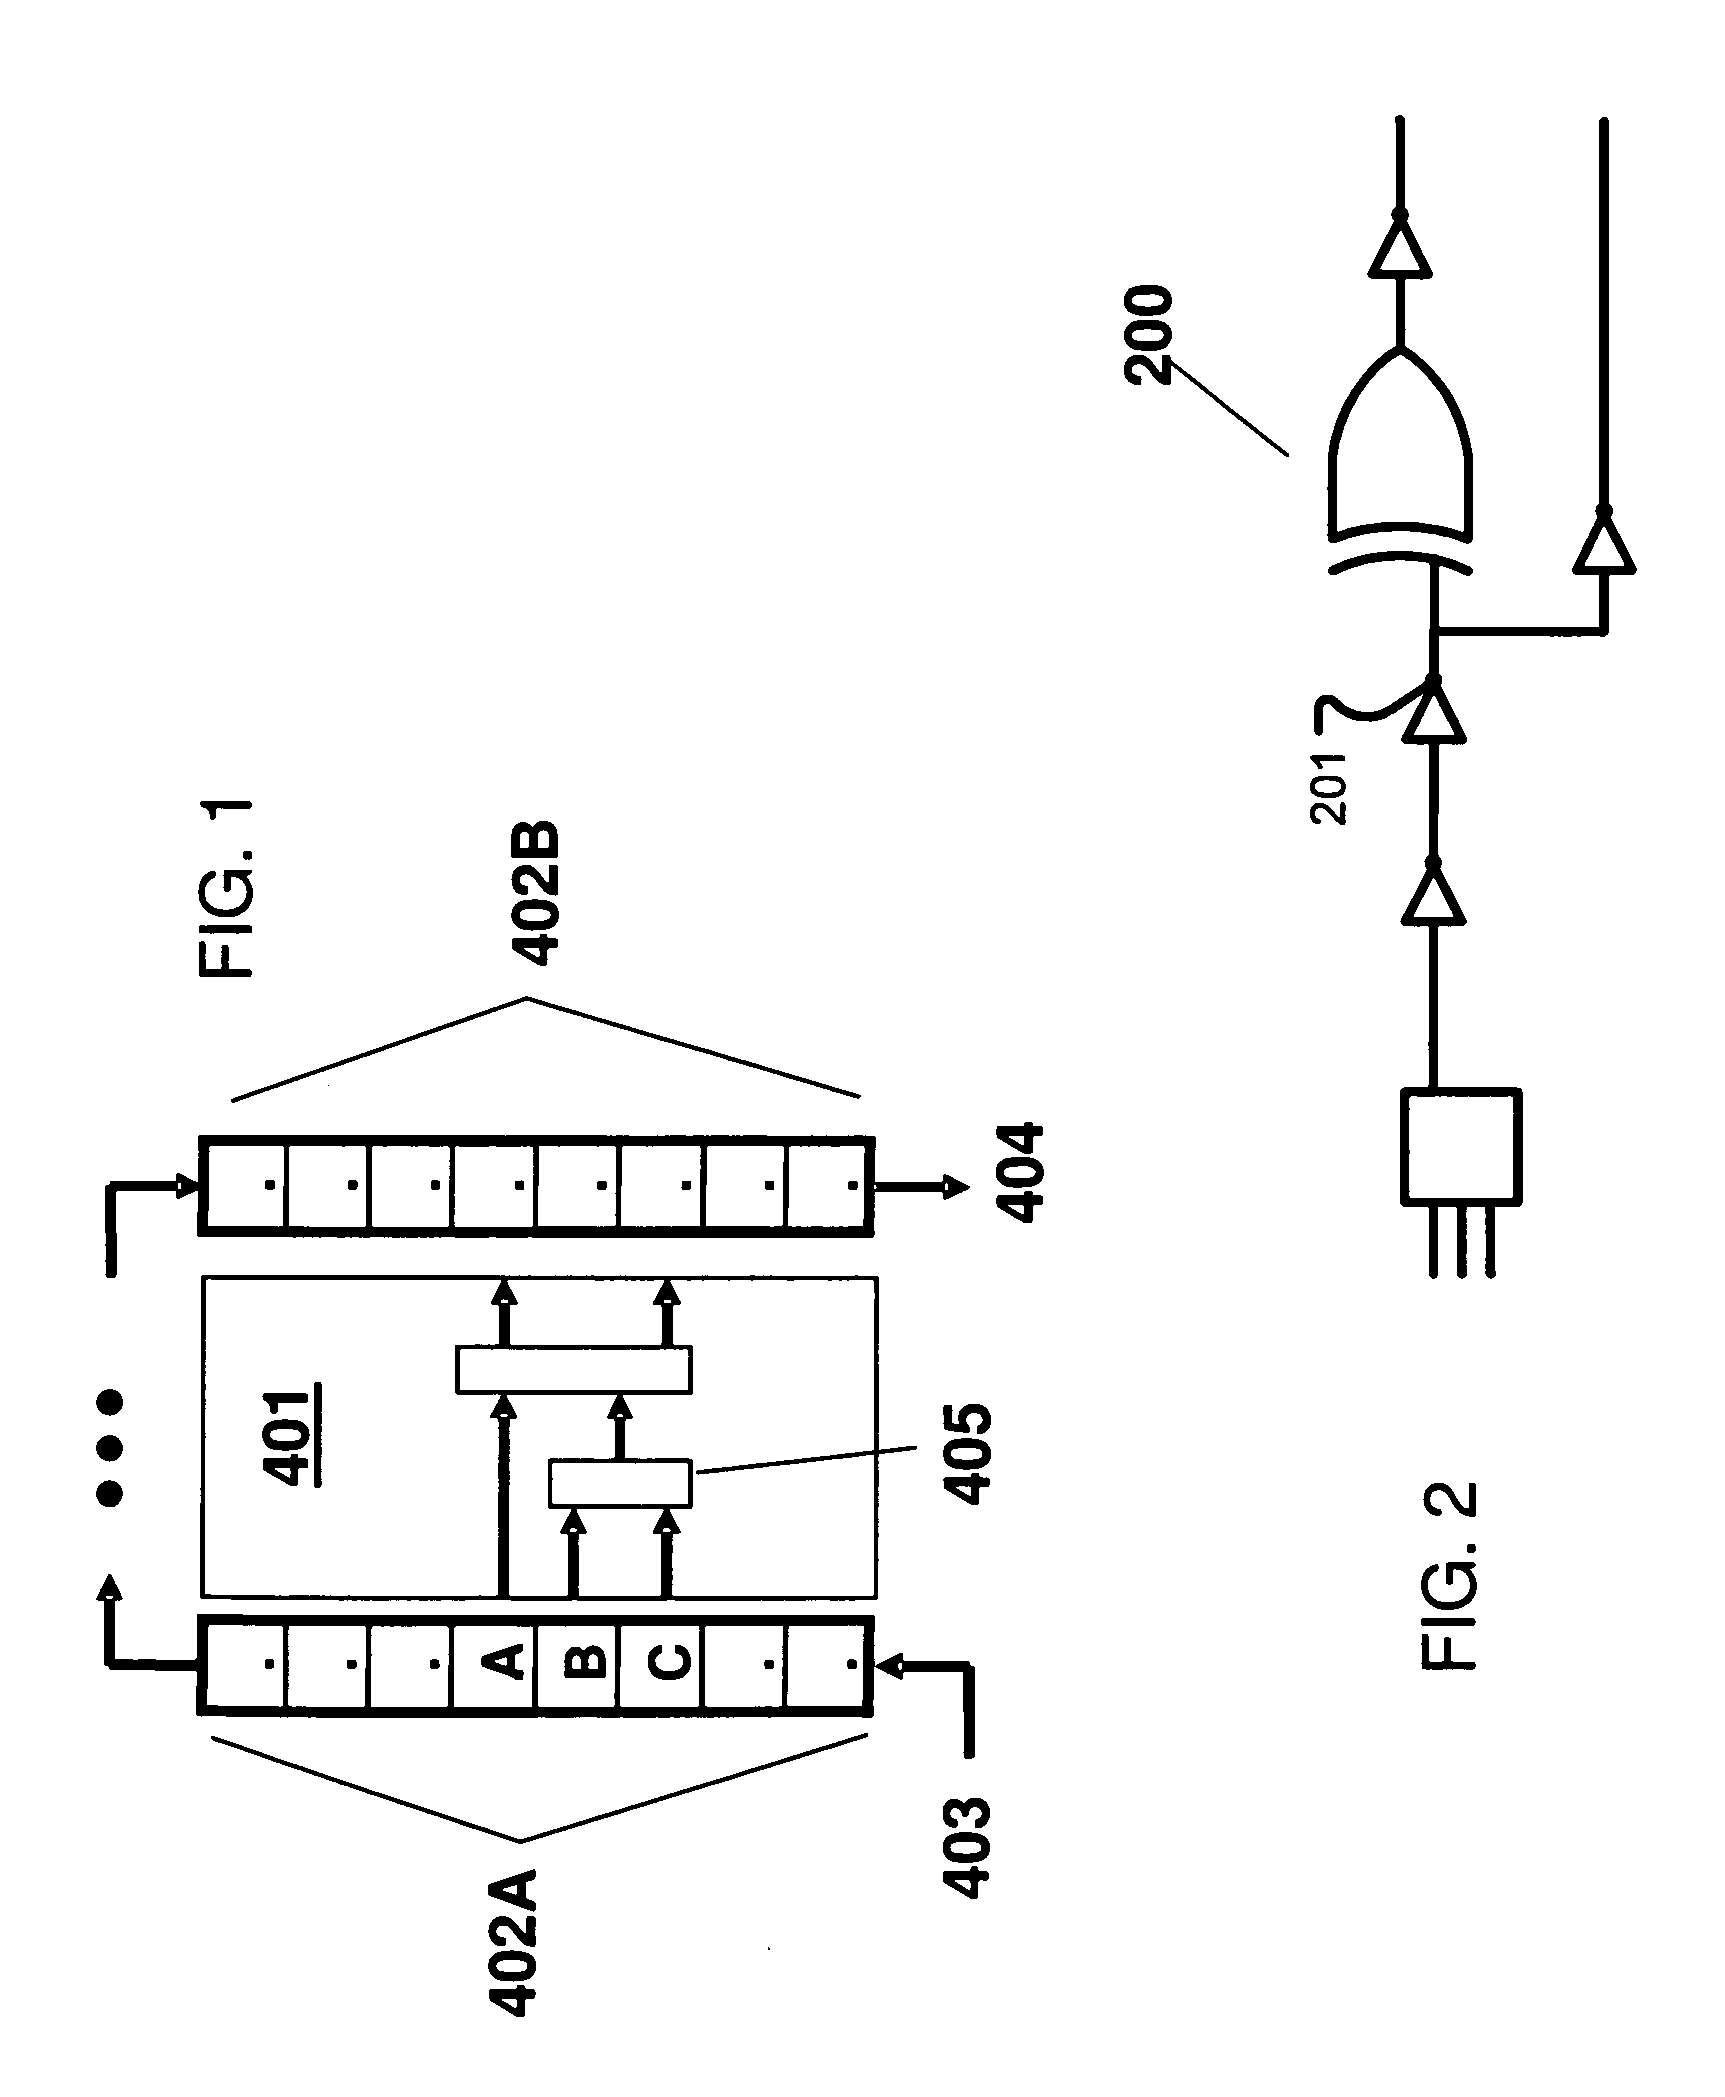 IC test vector generator for synchronized physical probing